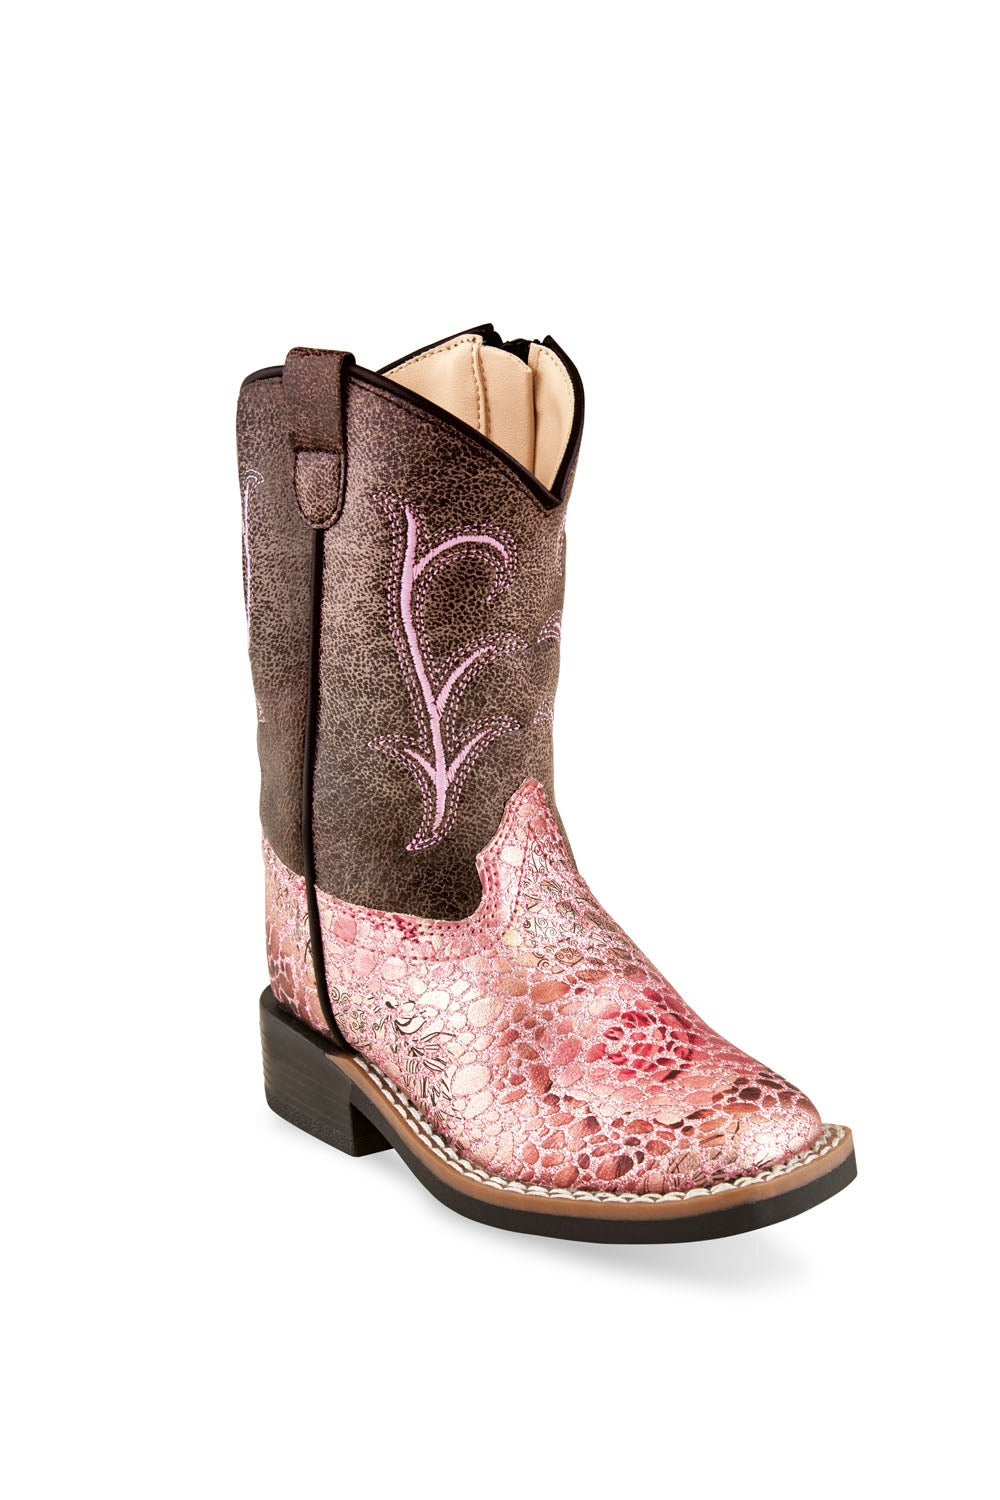 Old West Toddler's Antique Pink/Crackle Faux Leather Boots